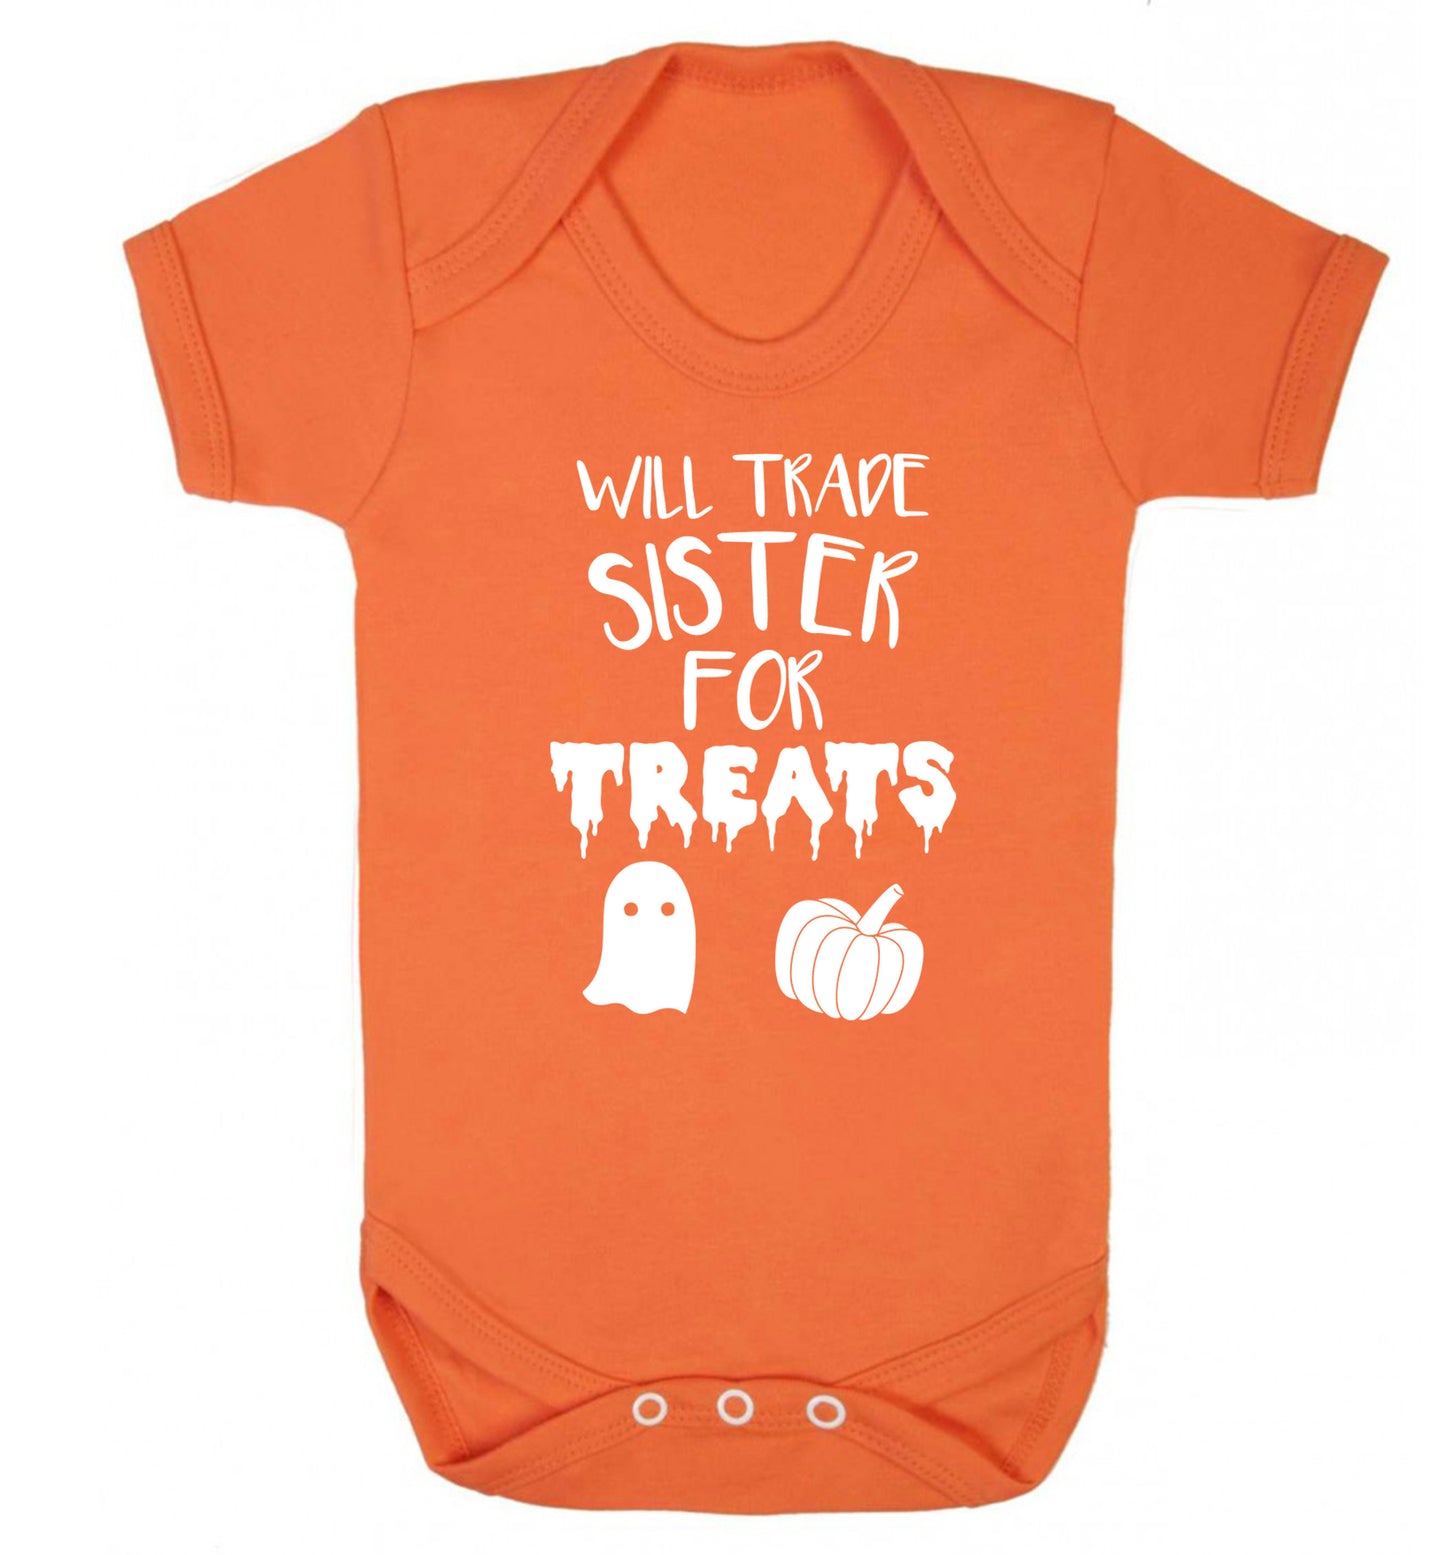 Will trade sister for treats Baby Vest orange 18-24 months